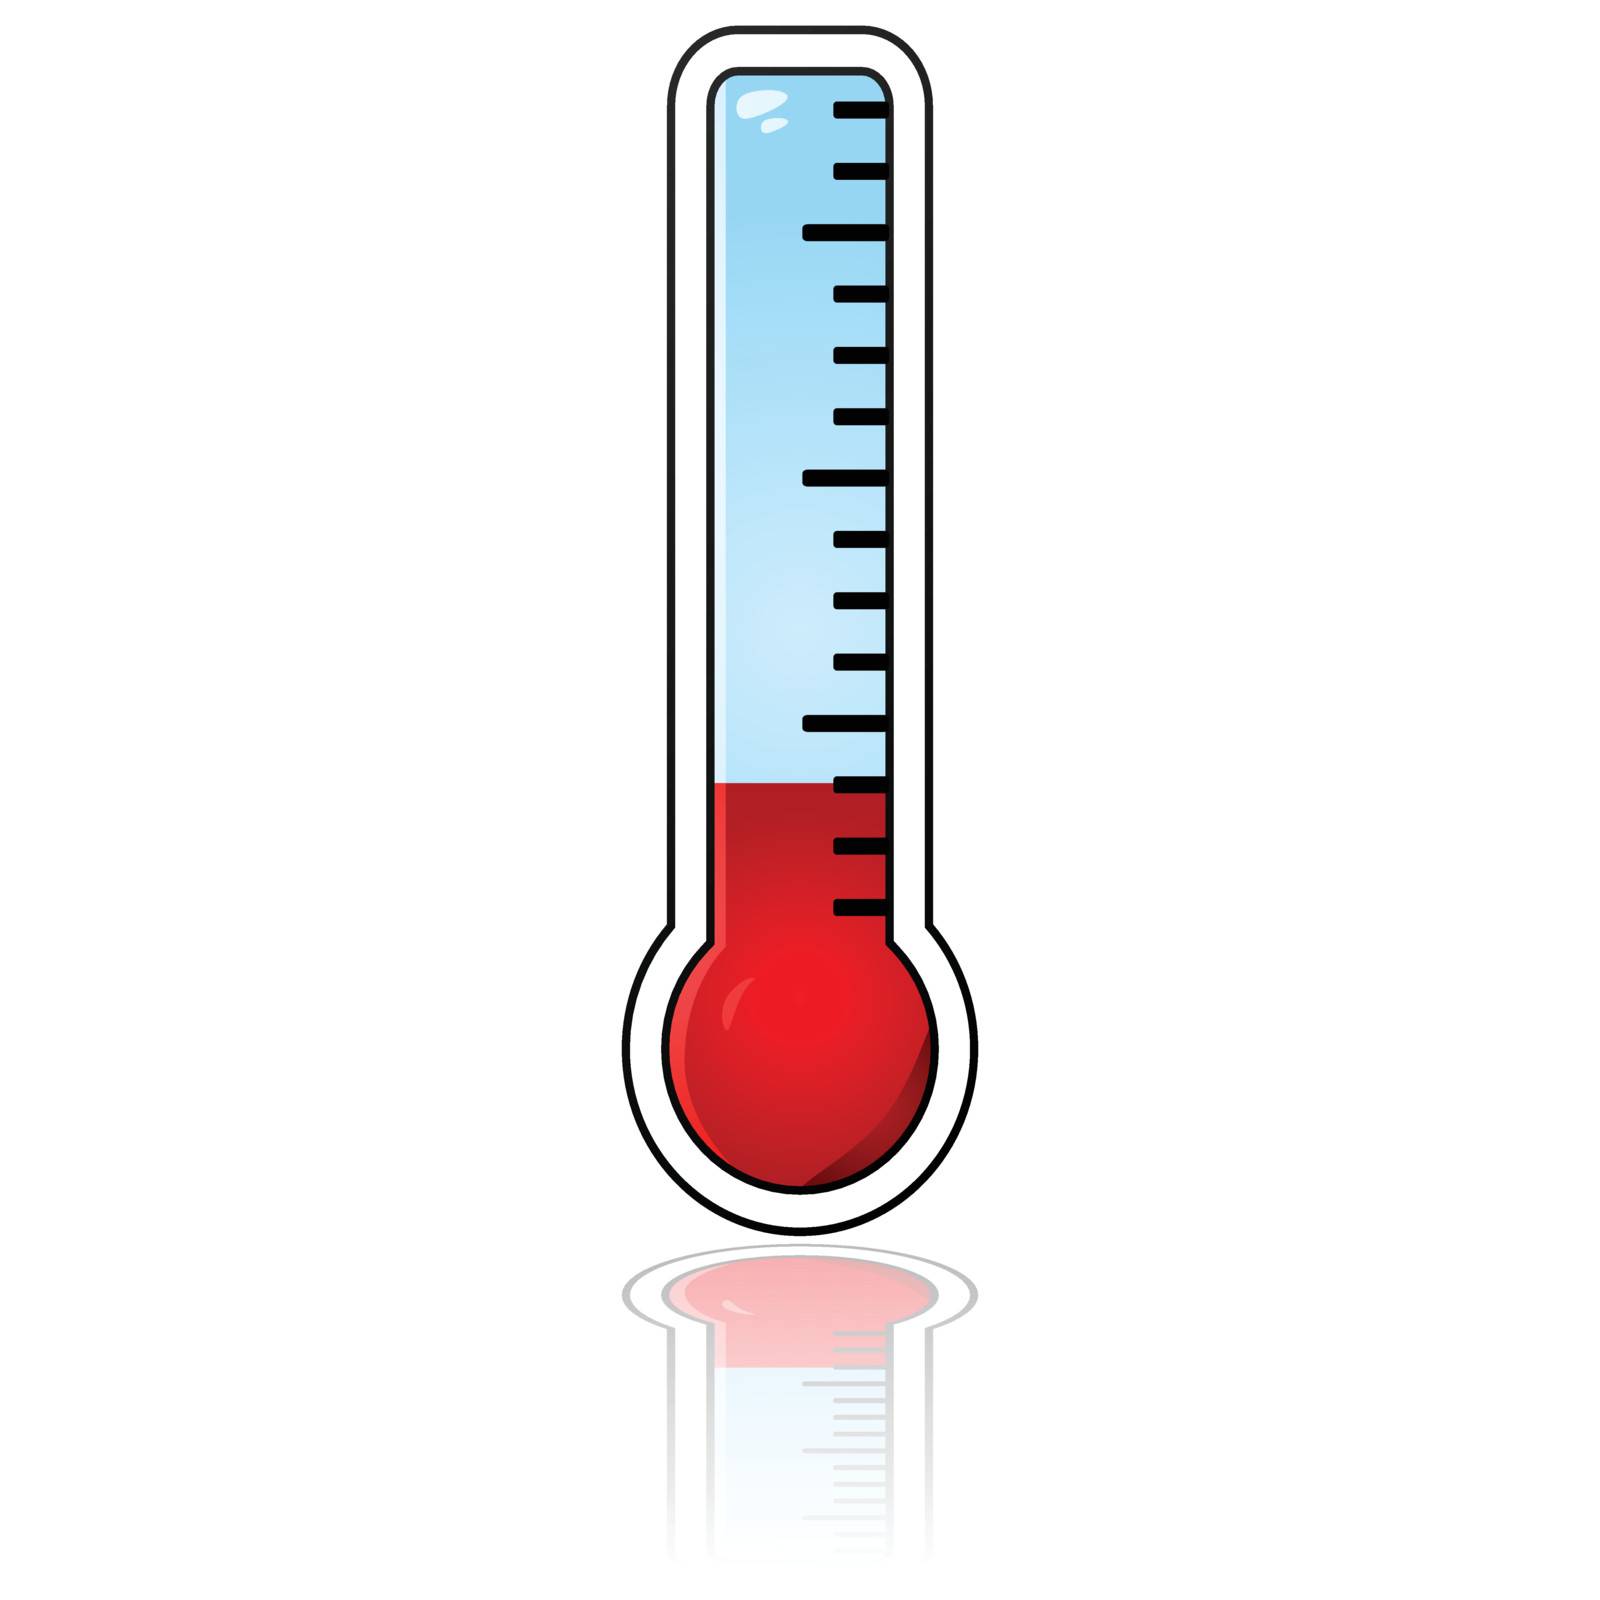 Glossy illustration showing a thermometer reflected over a white background